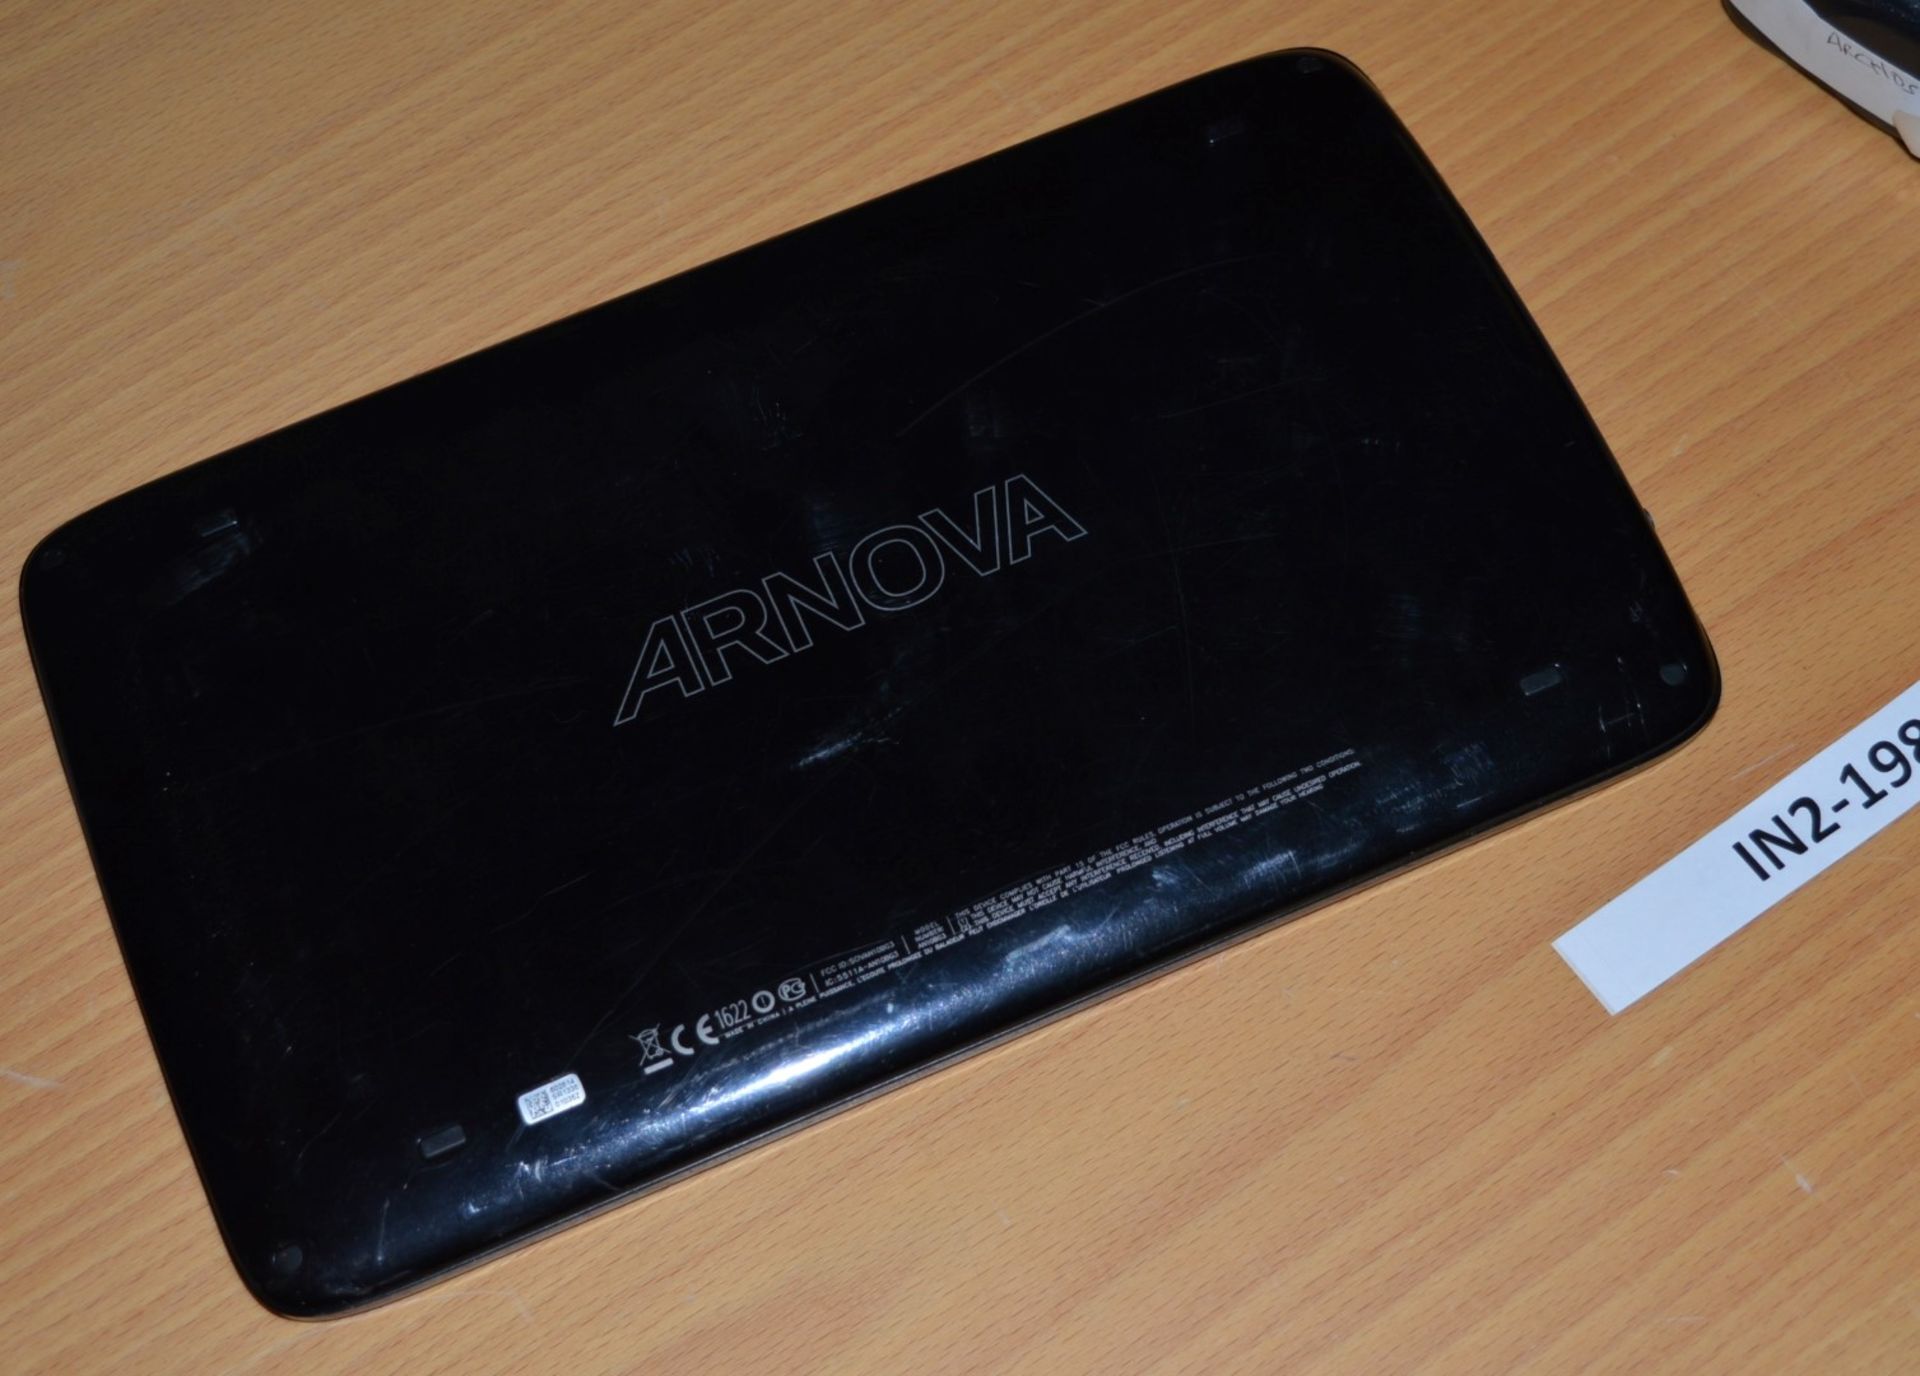 1 x Arnova 10b G3 10.1 Inch Tablet Computer - Features Android OS, 1ghz Processor,  1gb Ram, 8gb - Image 4 of 4